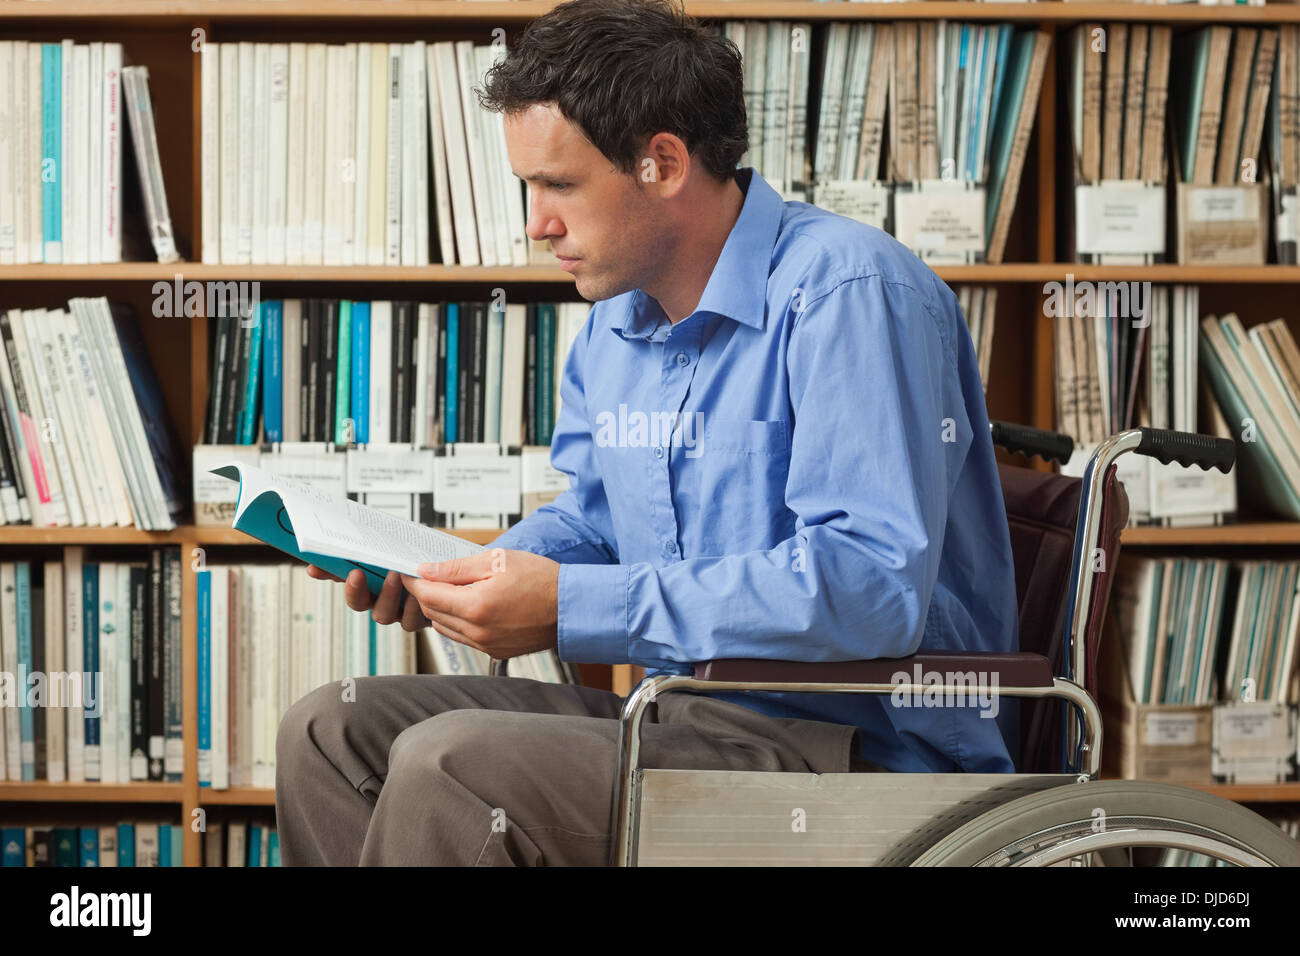 Serious man sitting in wheelchair reading a book Stock Photo